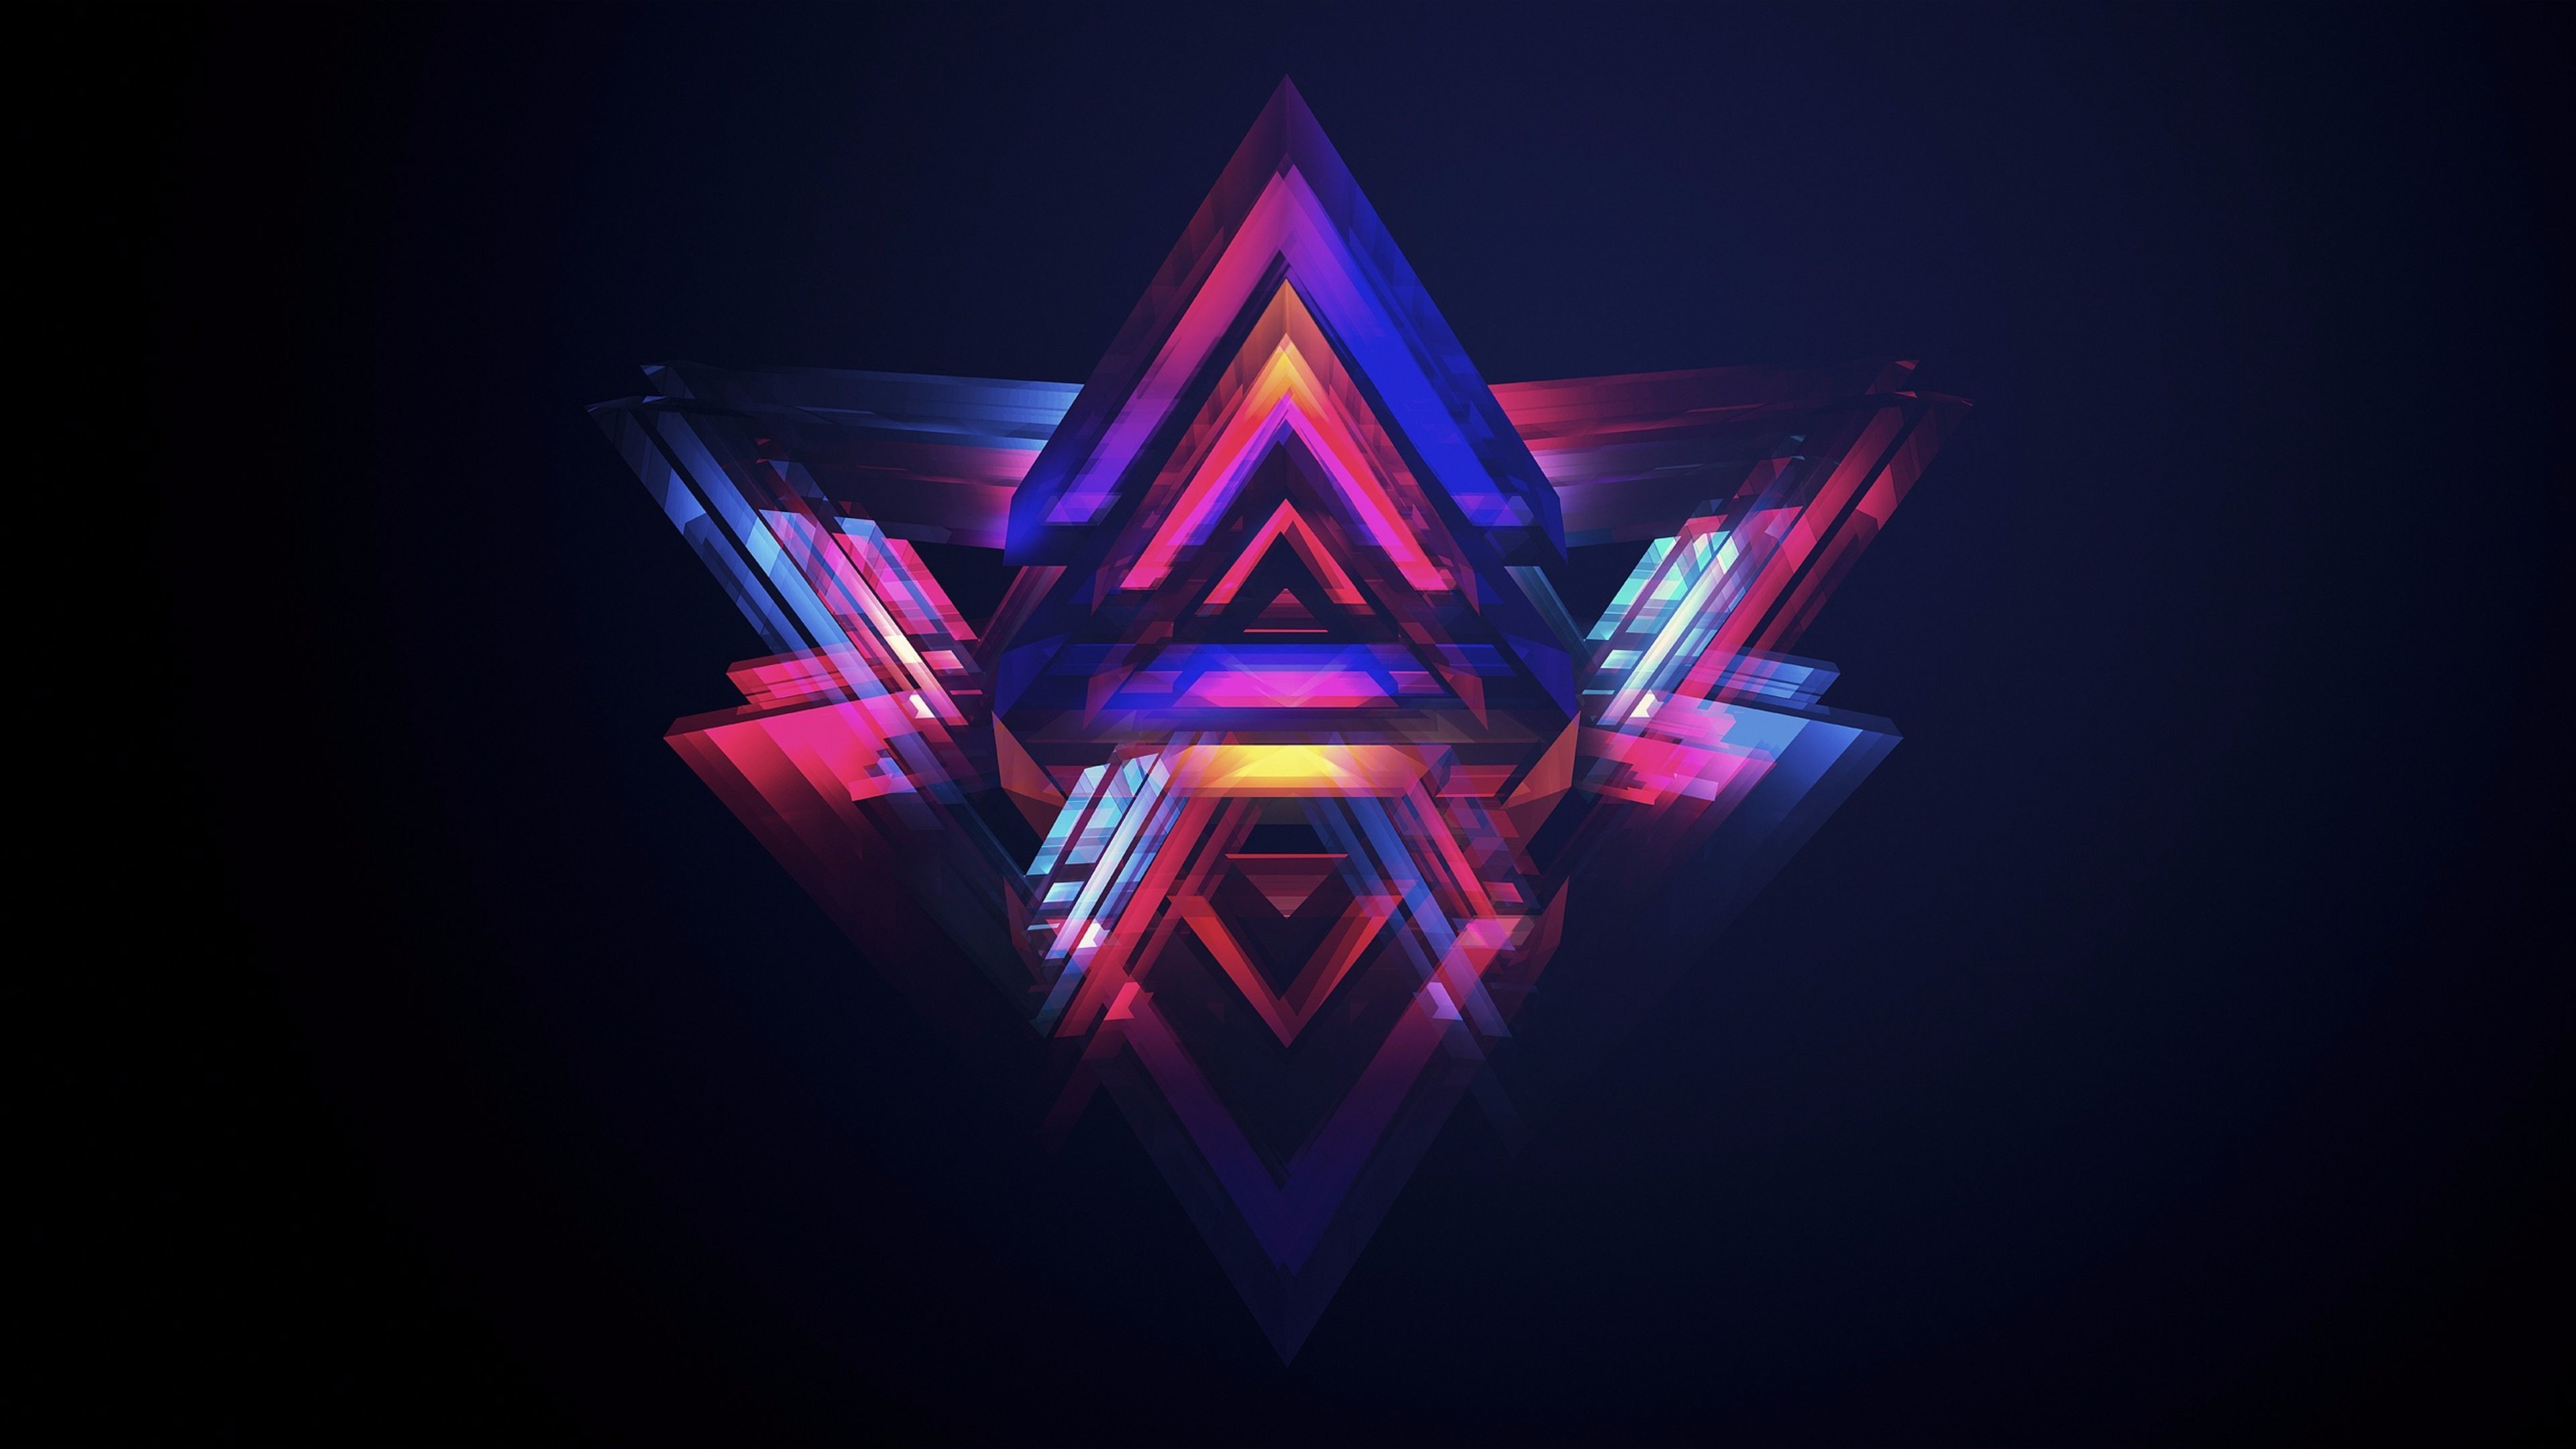 Colorful Pyramid Abstract 4K Wallpaper 38402160 Epic Wallpapers Pinterest Wallpaper and Artwork